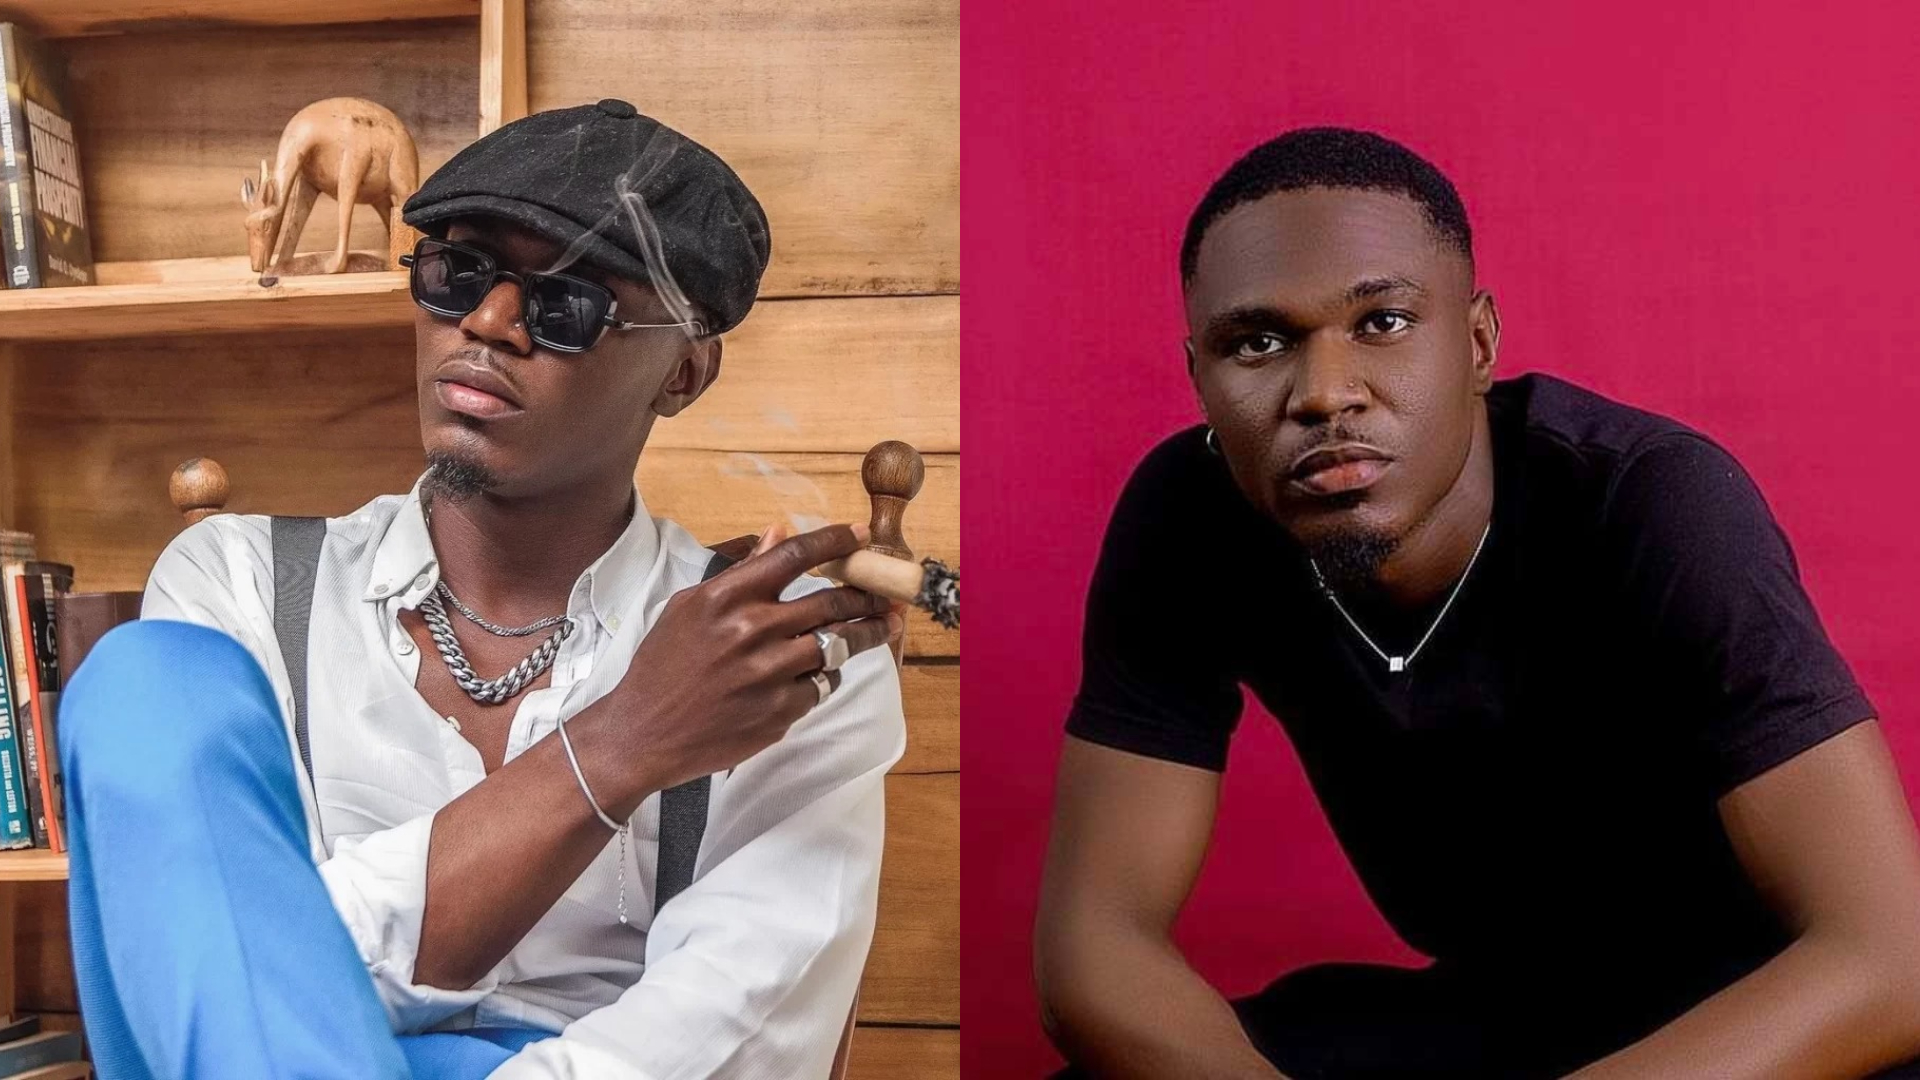 “I started 2023 broke, begged to make a living" – Spyro celebrates birthday, recounts ordeal at the beginning of the year